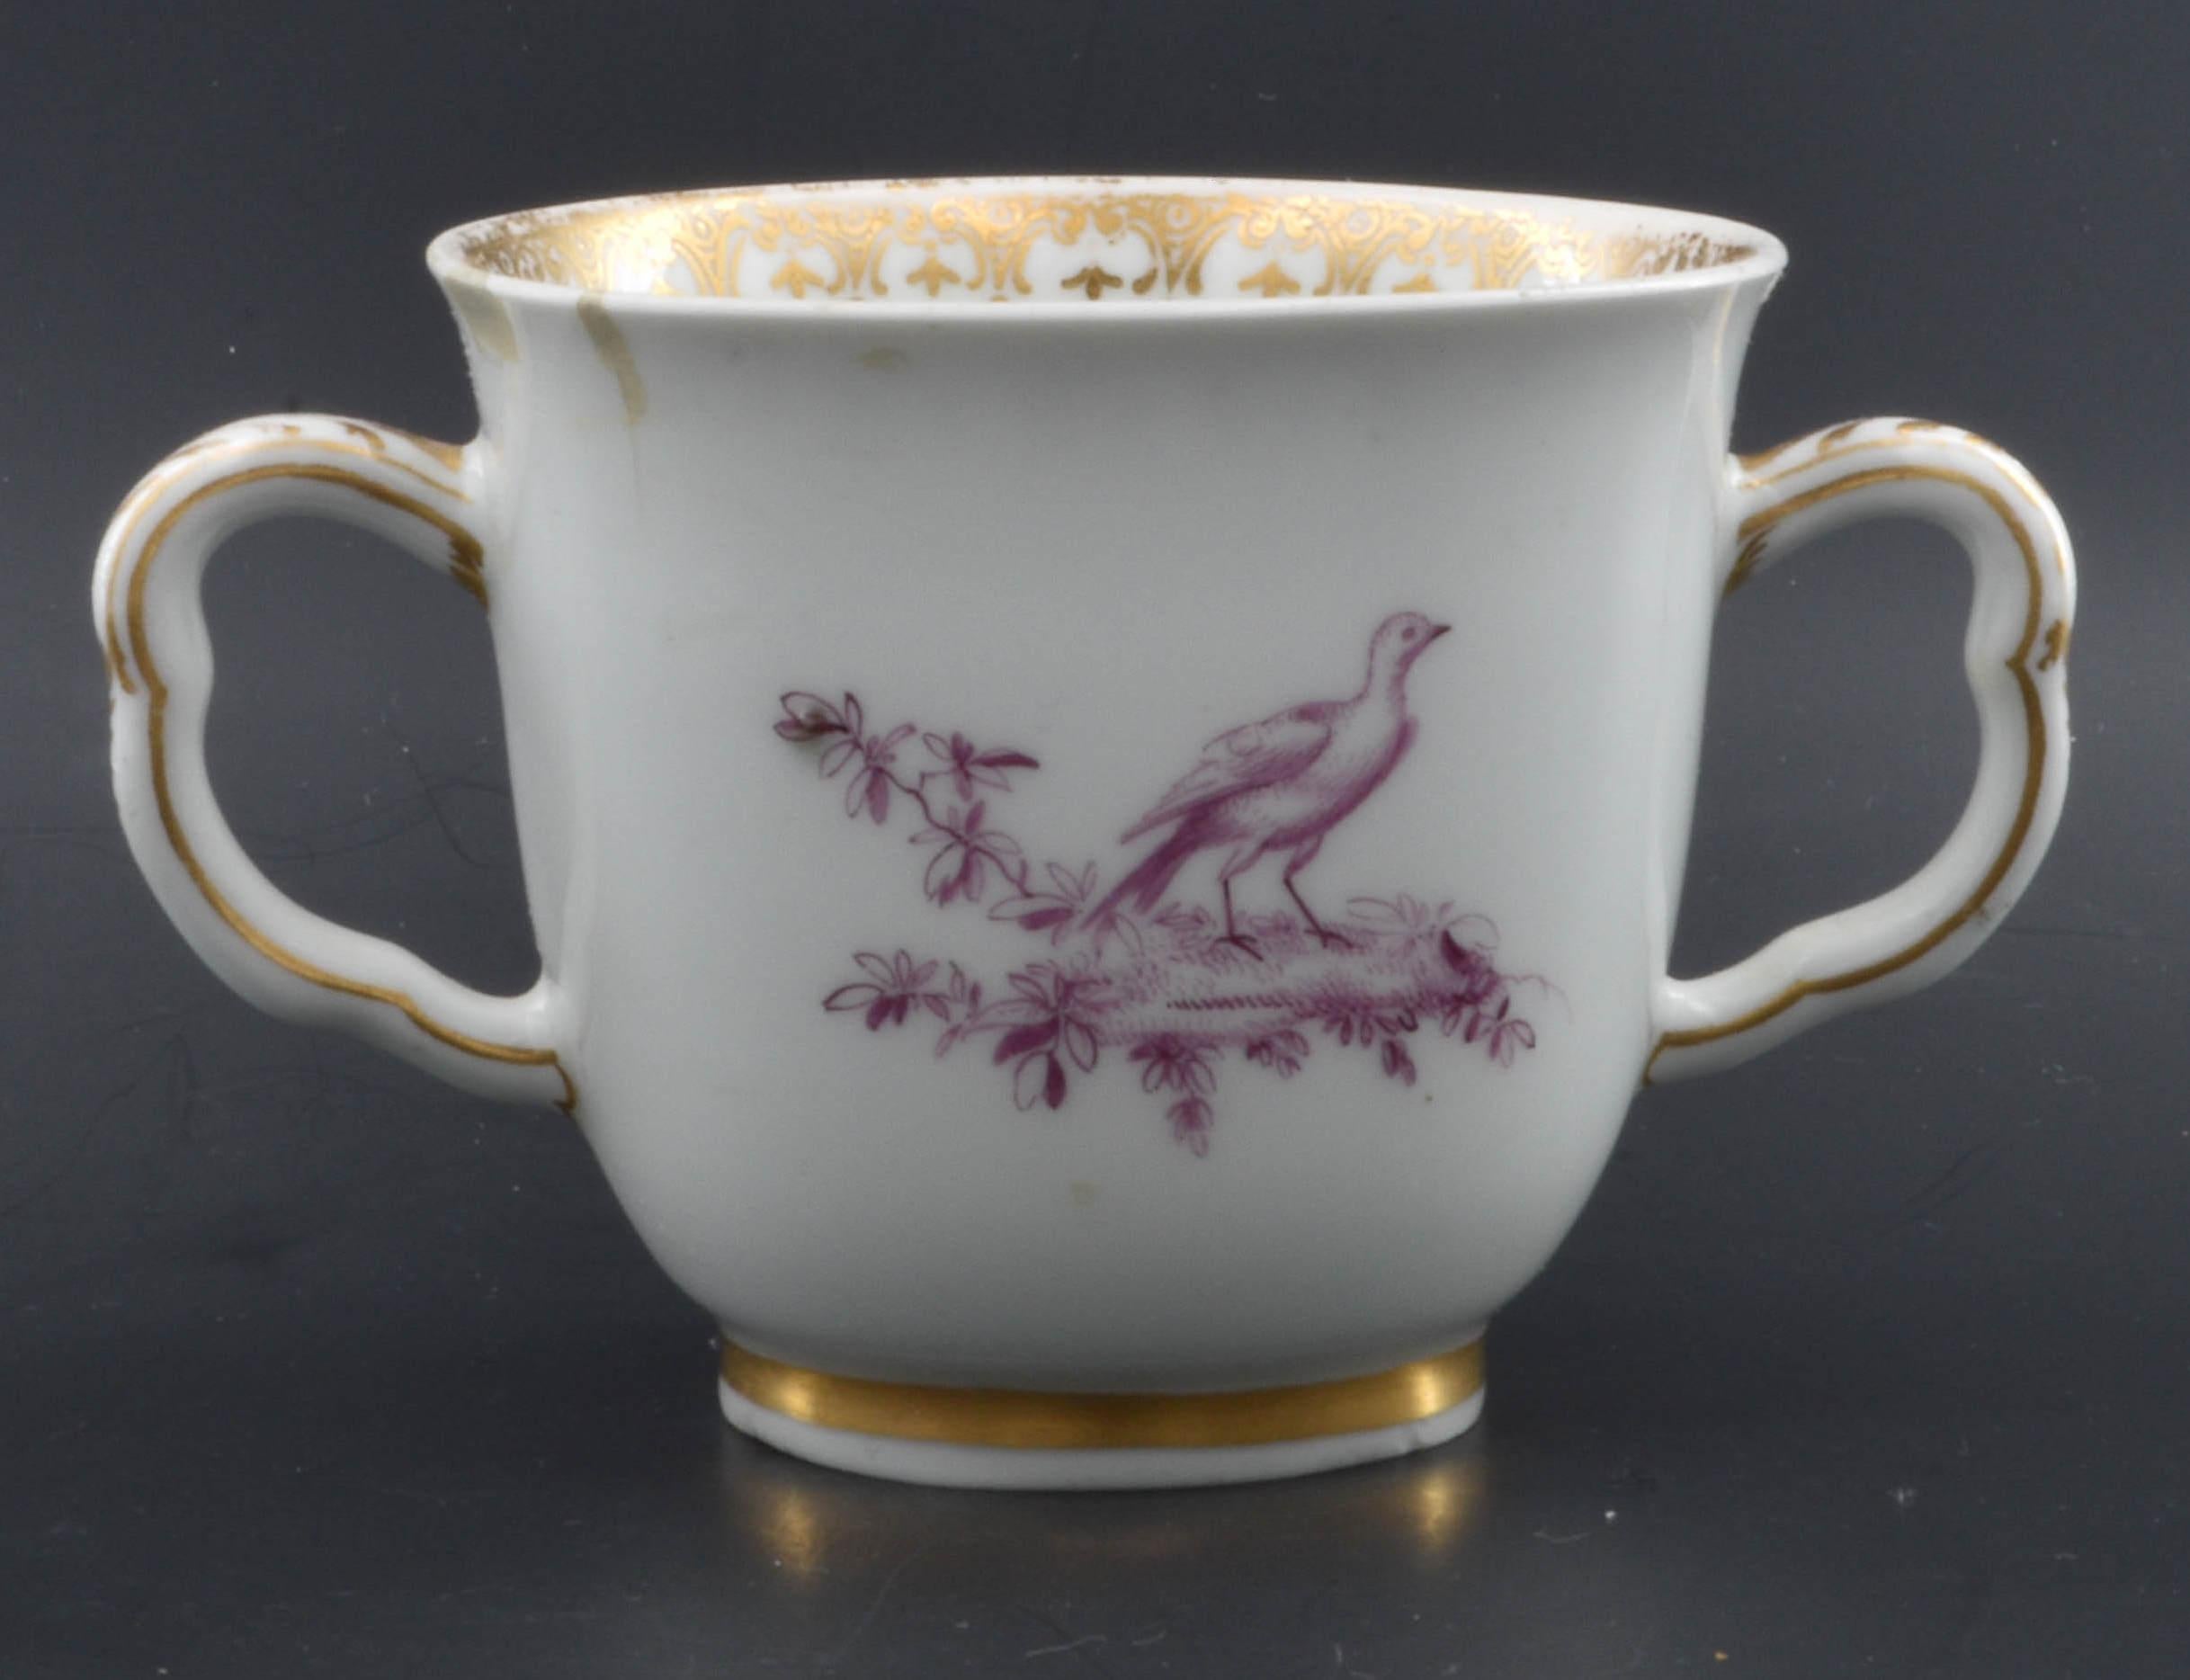 Chocolate Cup, Finely Painted with Puce Birds, Chelsea C1765 In Fair Condition For Sale In Melbourne, Victoria